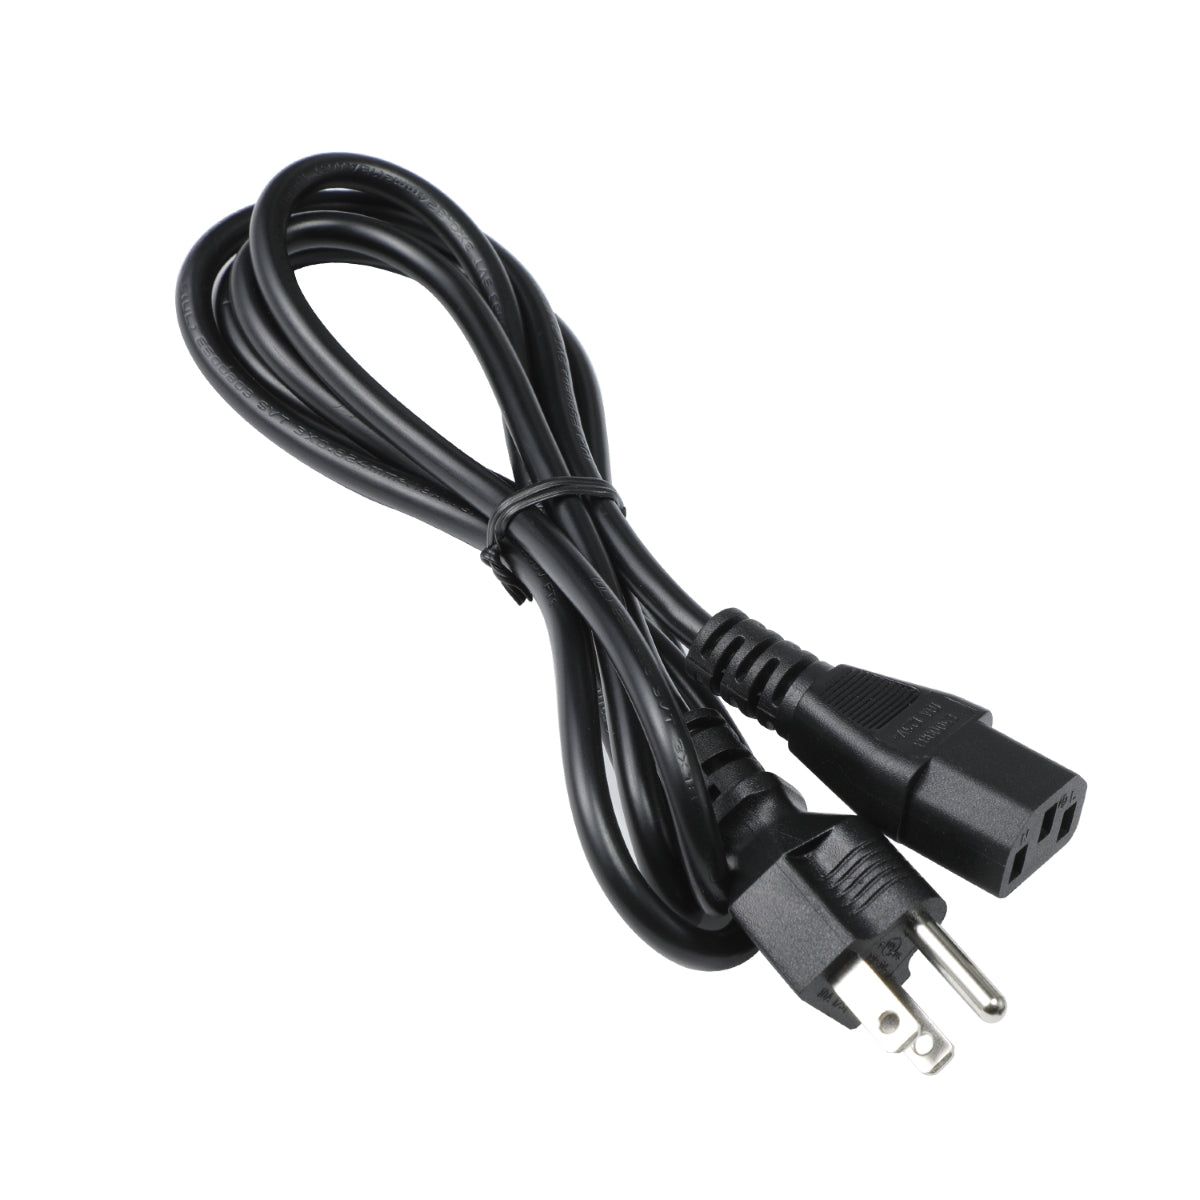 Power Cord for Samsung LC49RG90SSNXZA Monitor TV.